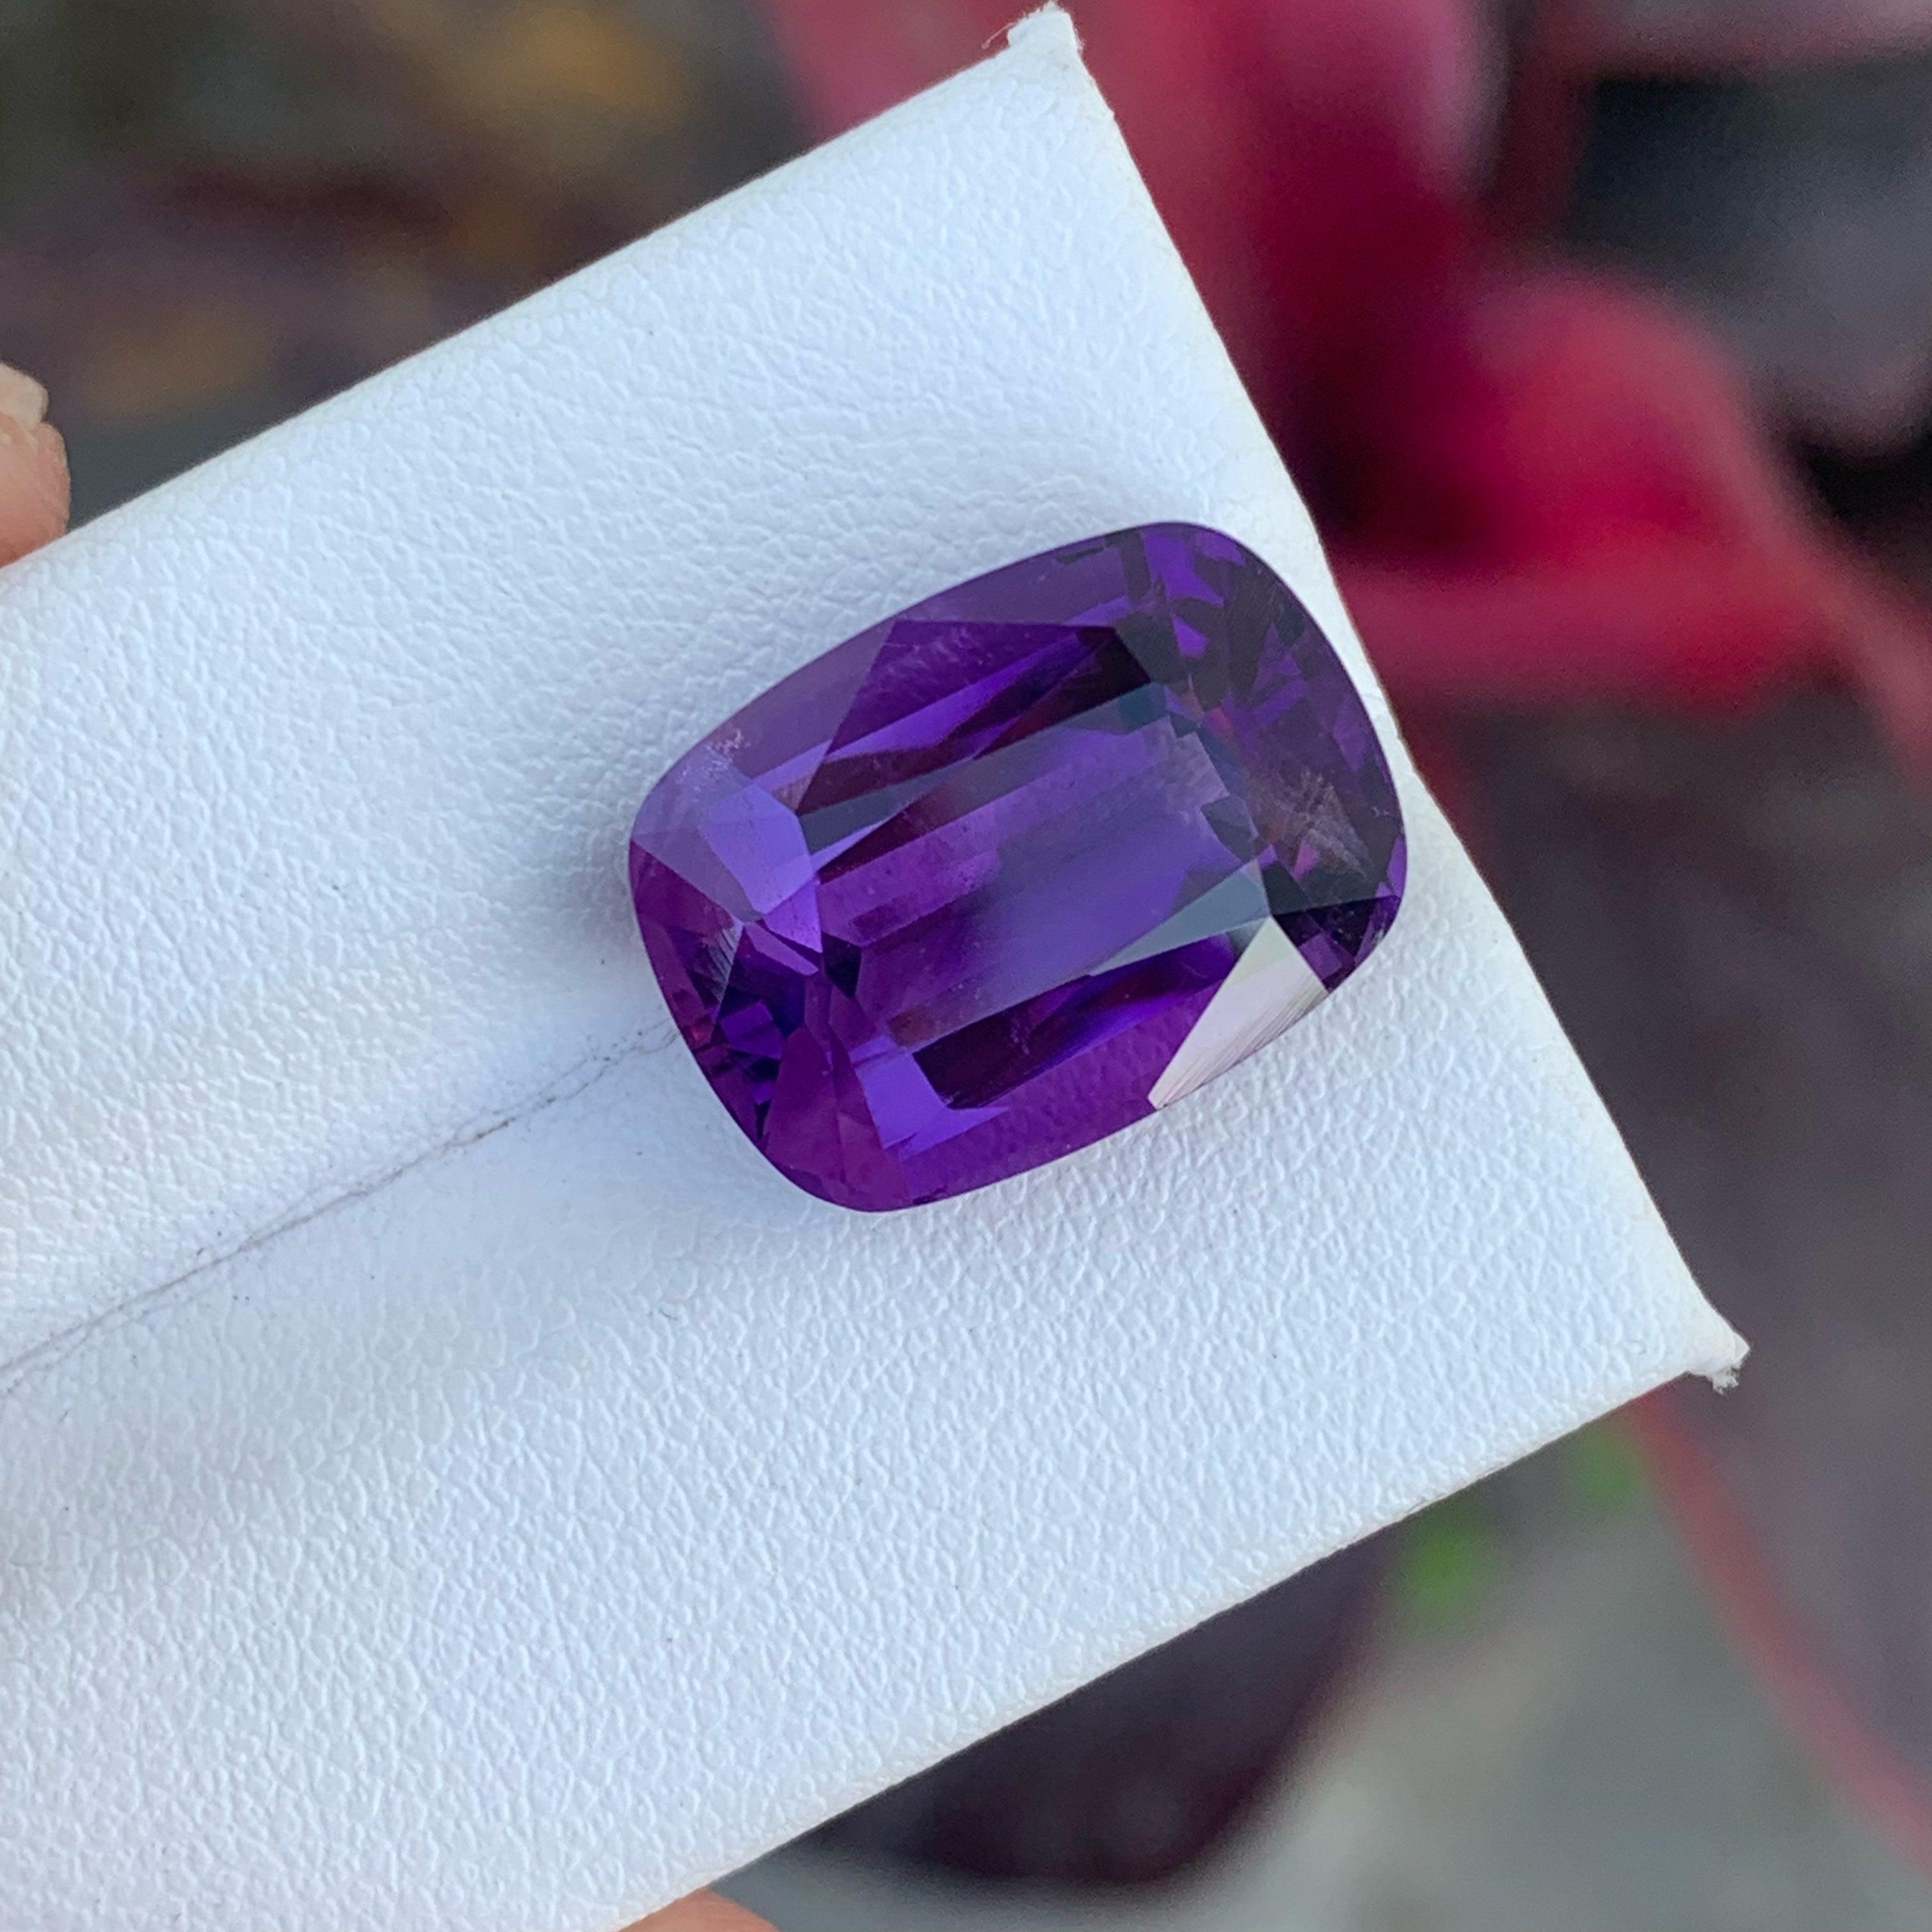 Adorable Loose Amethyst Gemstone, Available for sale at wholesale price natural high quality at 12.10 Carats Eye Clean Clarity Unheated Natural Amethyst From Brazil.
 
Product Information:
GEMSTONE TYPE: Adorable Loose Amethyst Gemstone
WEIGHT: